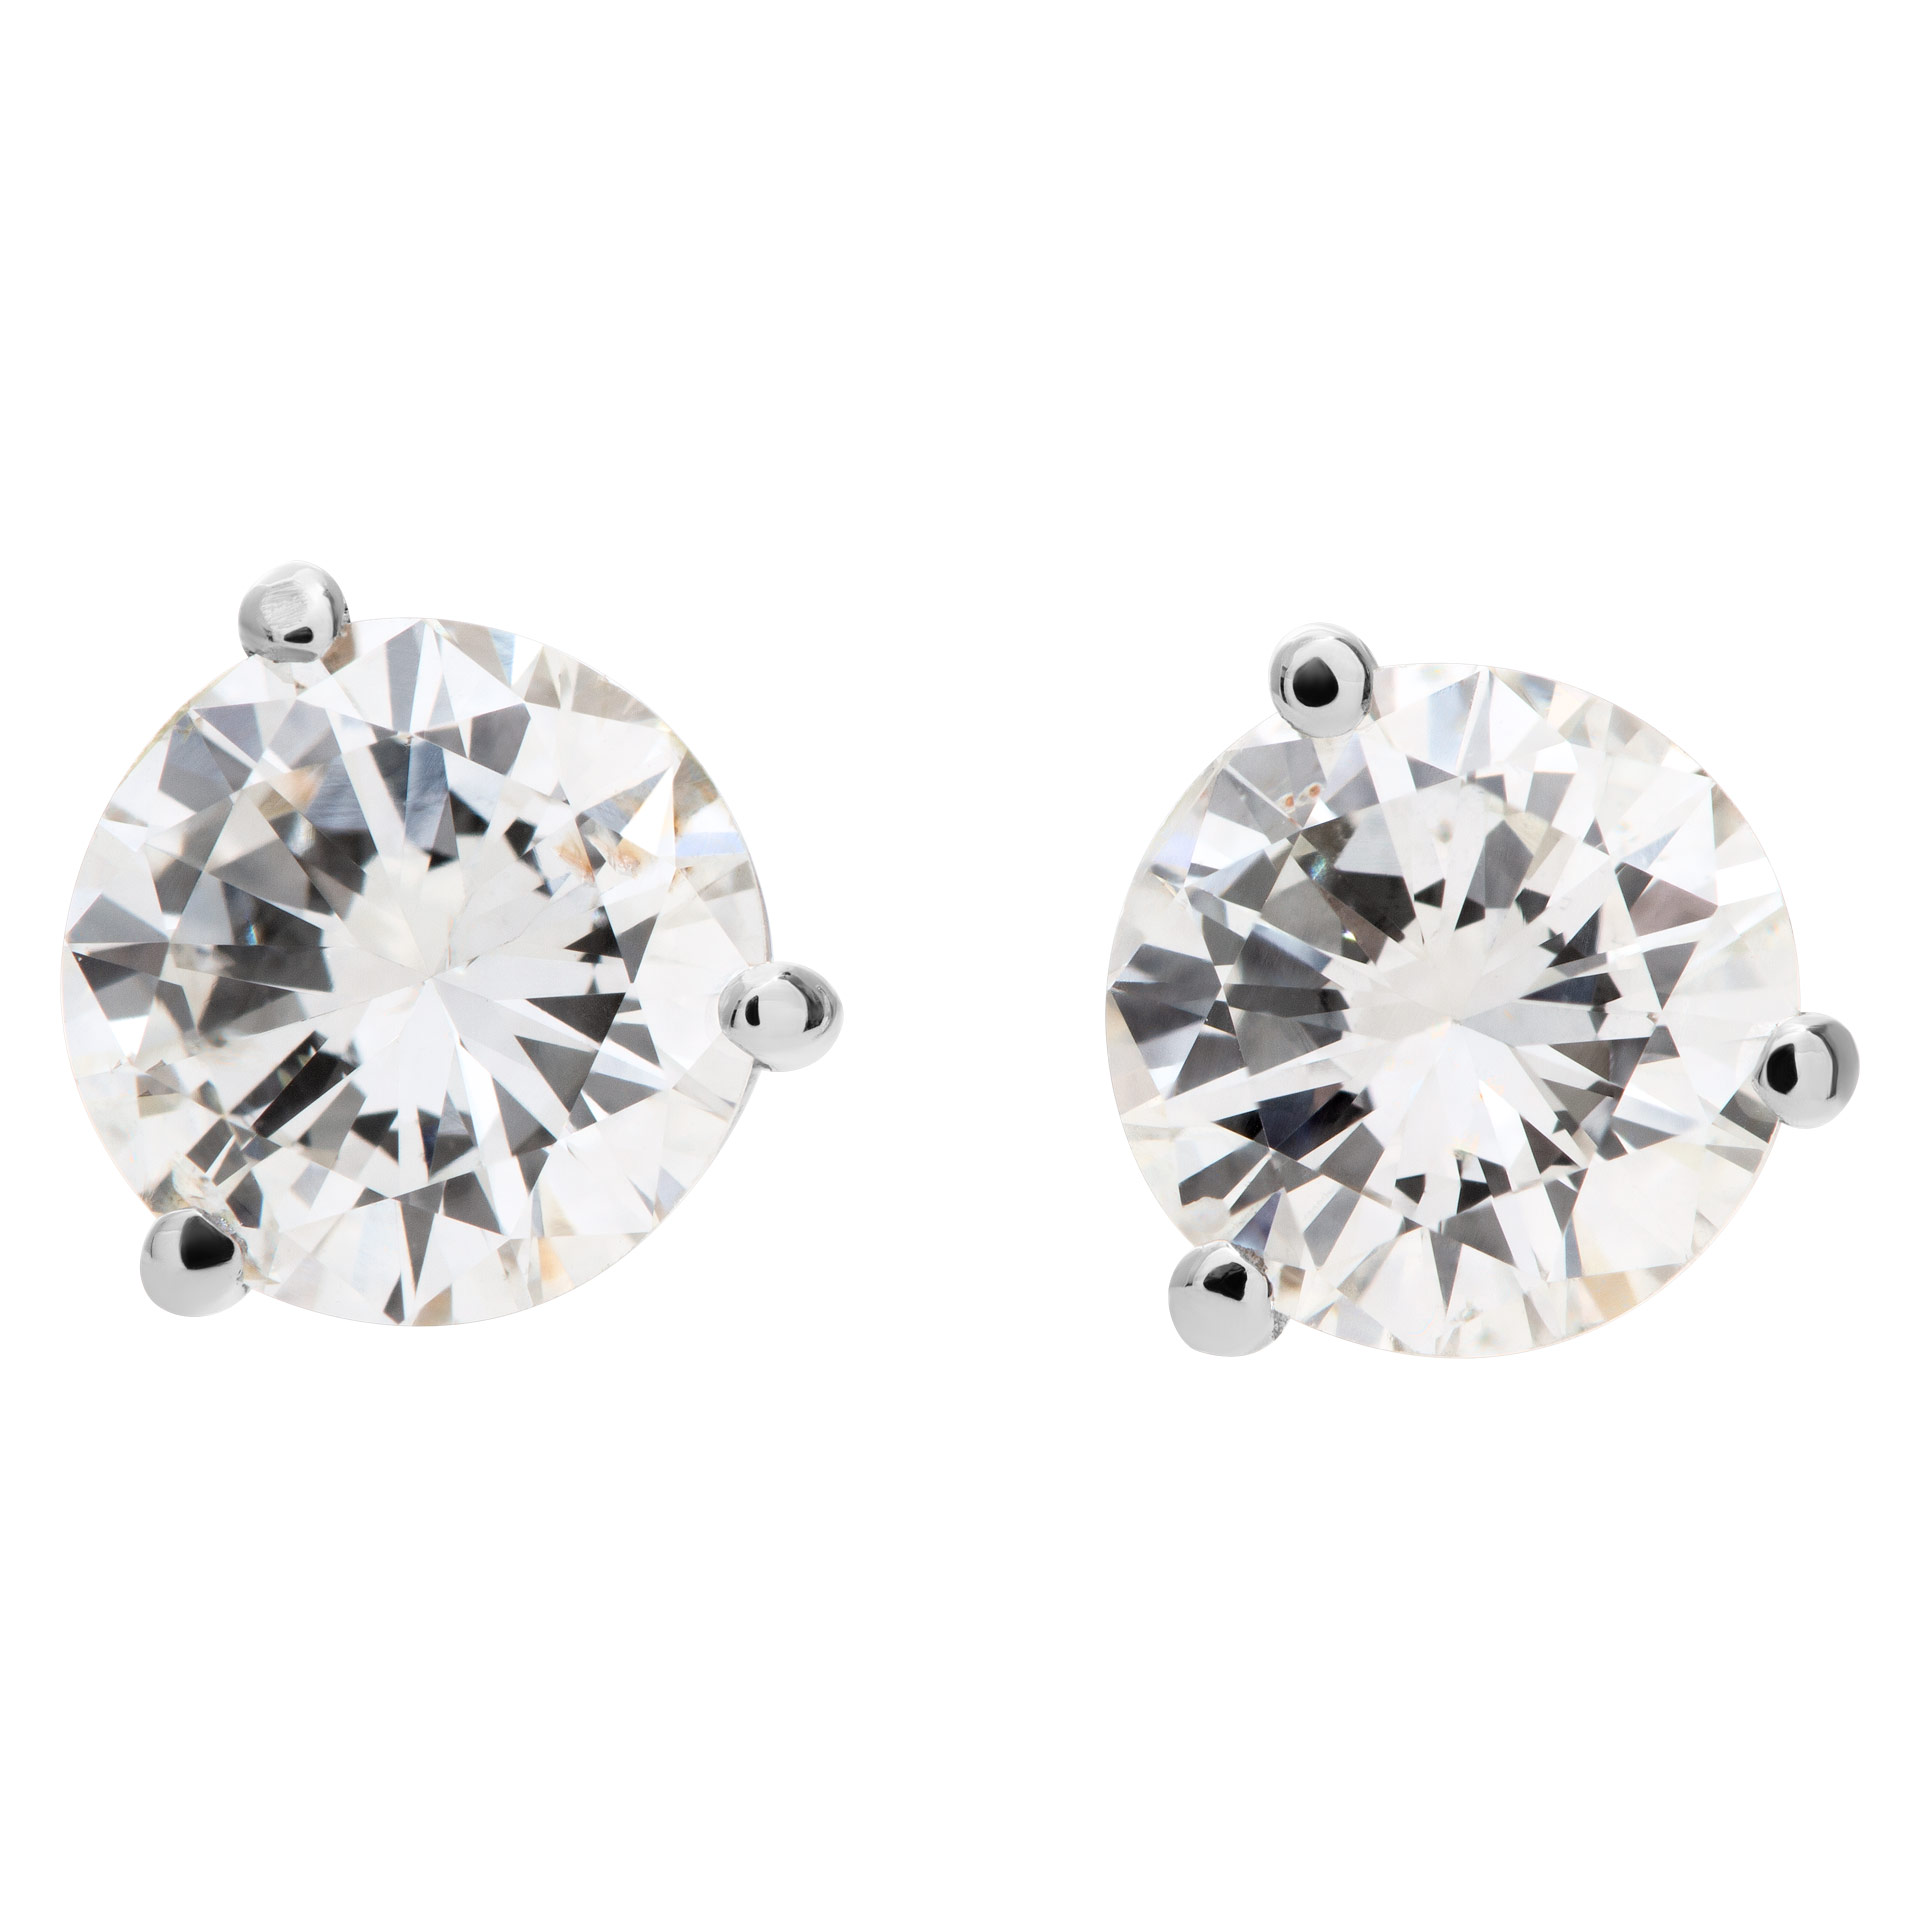 GIA certified diamond studs 0.92 carat (H color, SI2 clarity) and 0.96 carat (I color, SI2 clarity) image 1